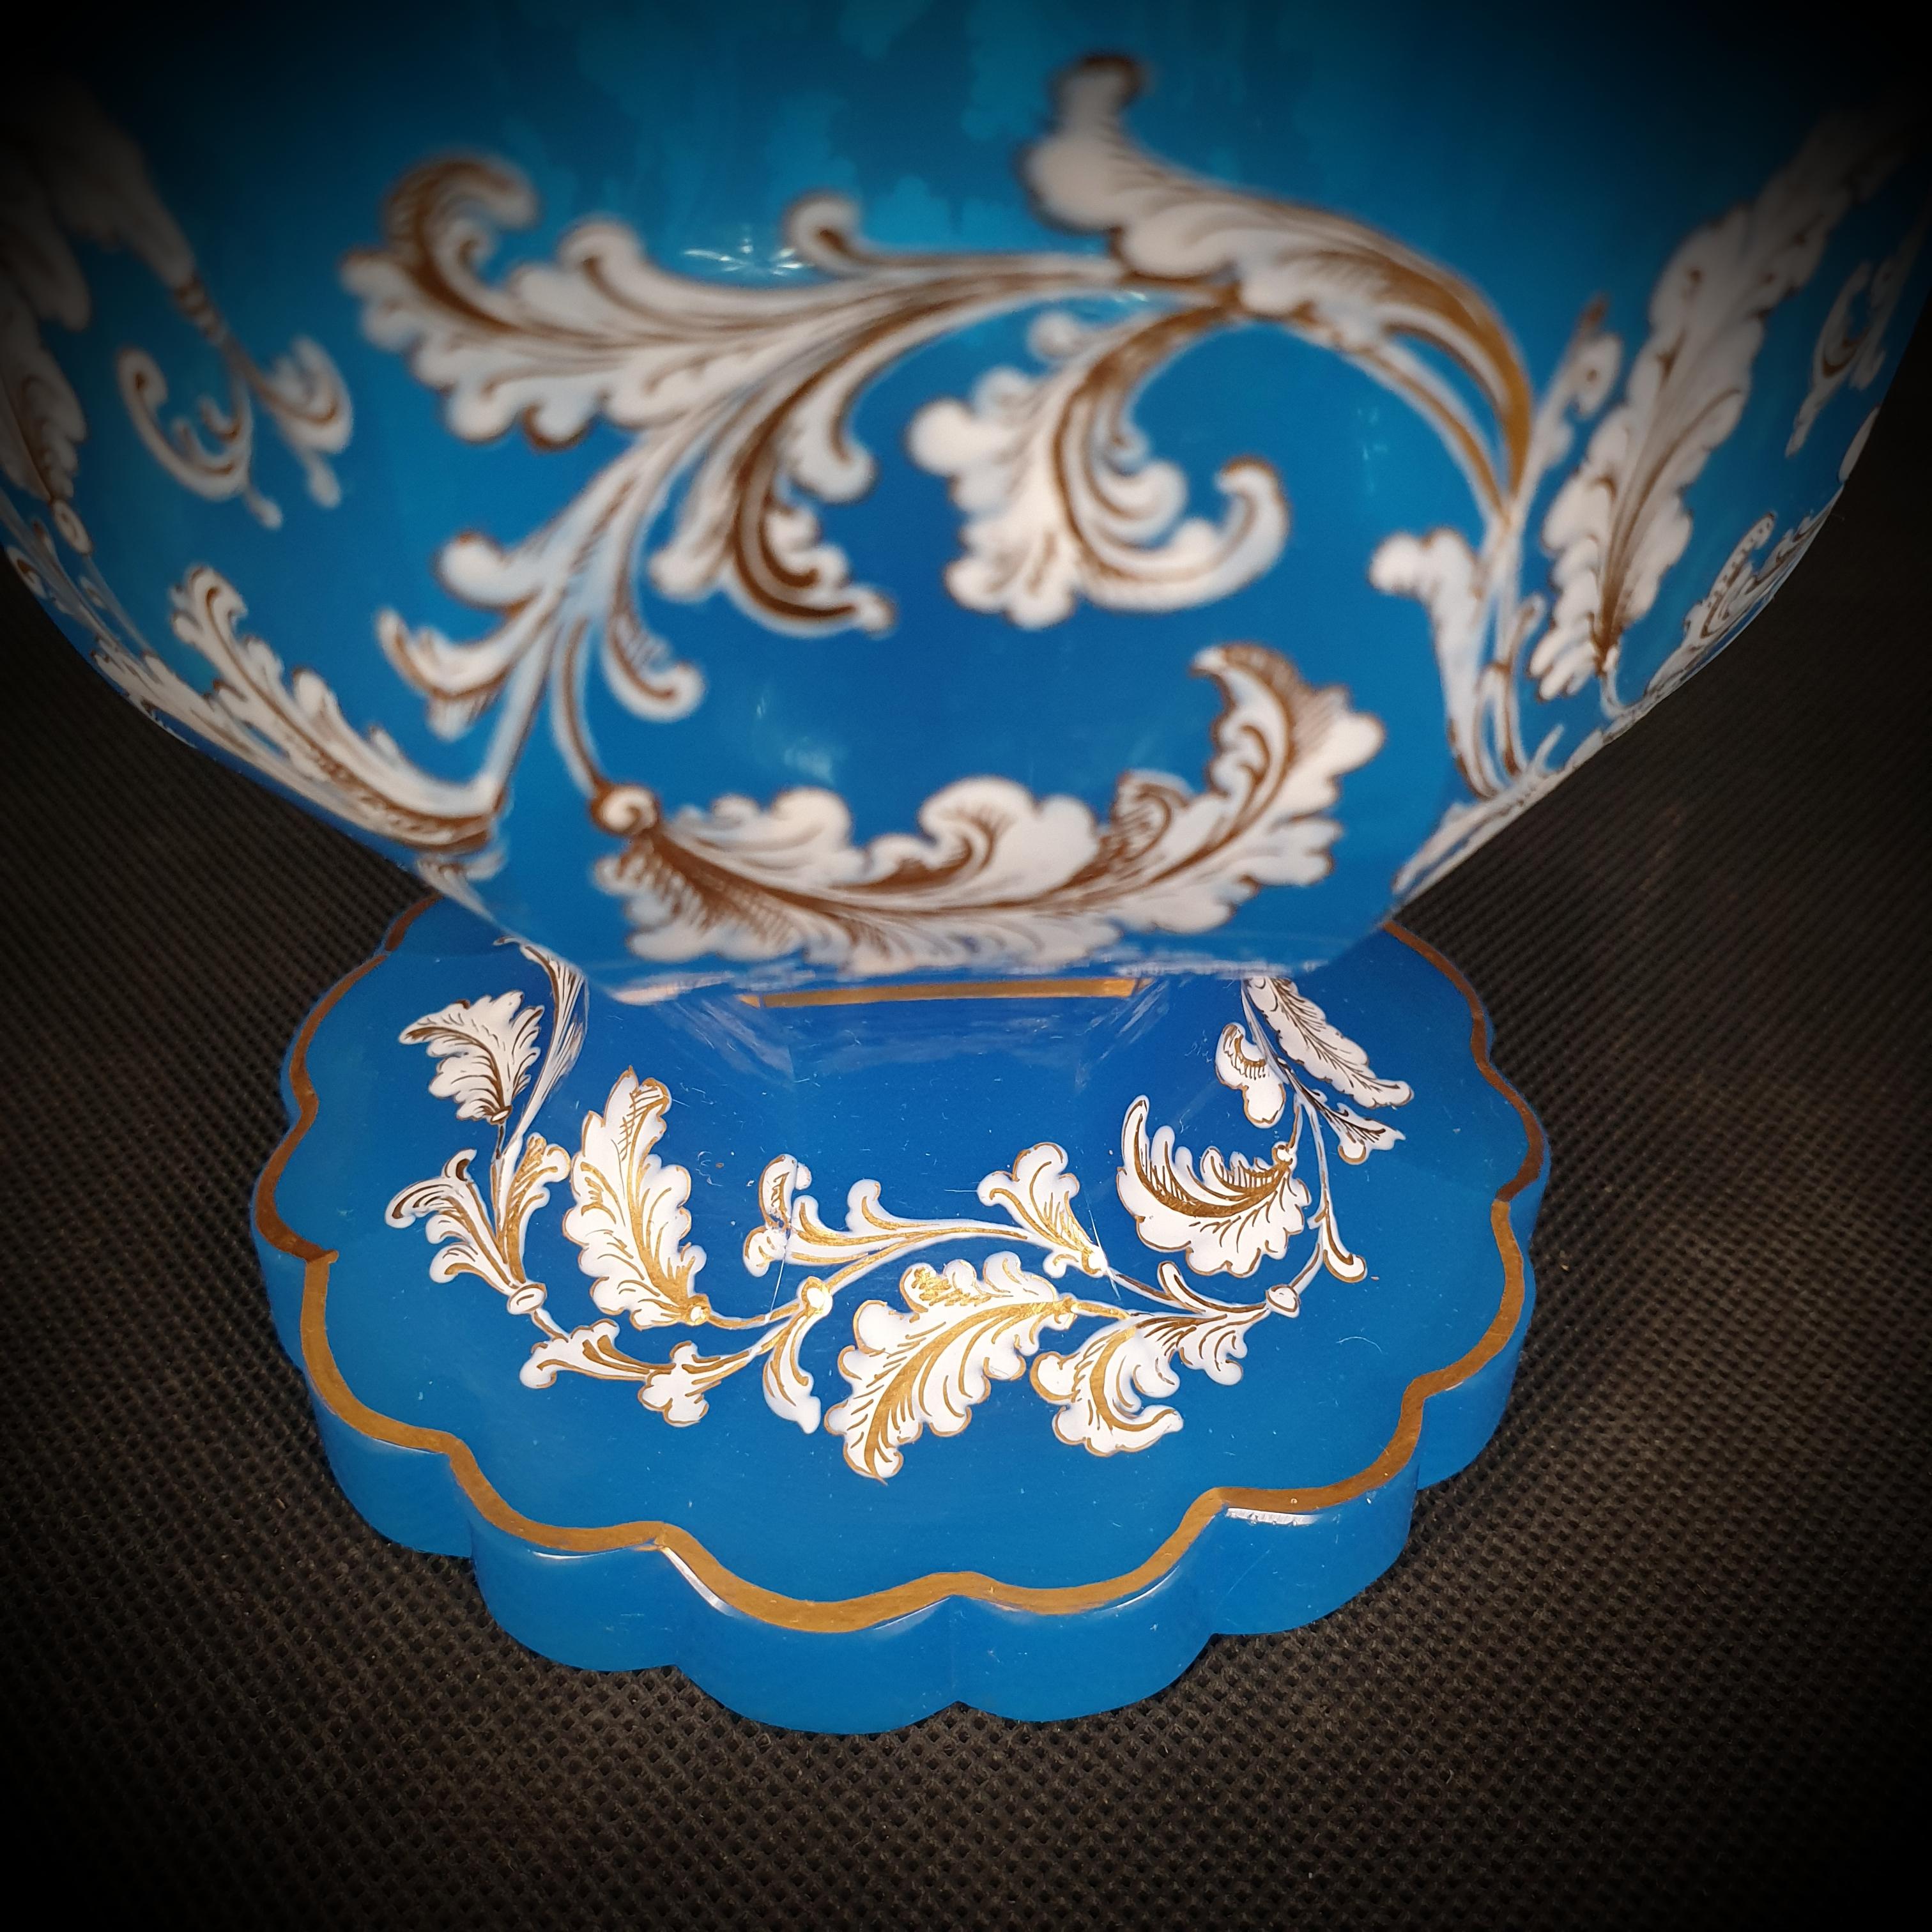 Cut Blue Moser Opaline Glass Serving Dish, Flower Shaped, Gilded and Painted In Good Condition For Sale In Queens Village, NY